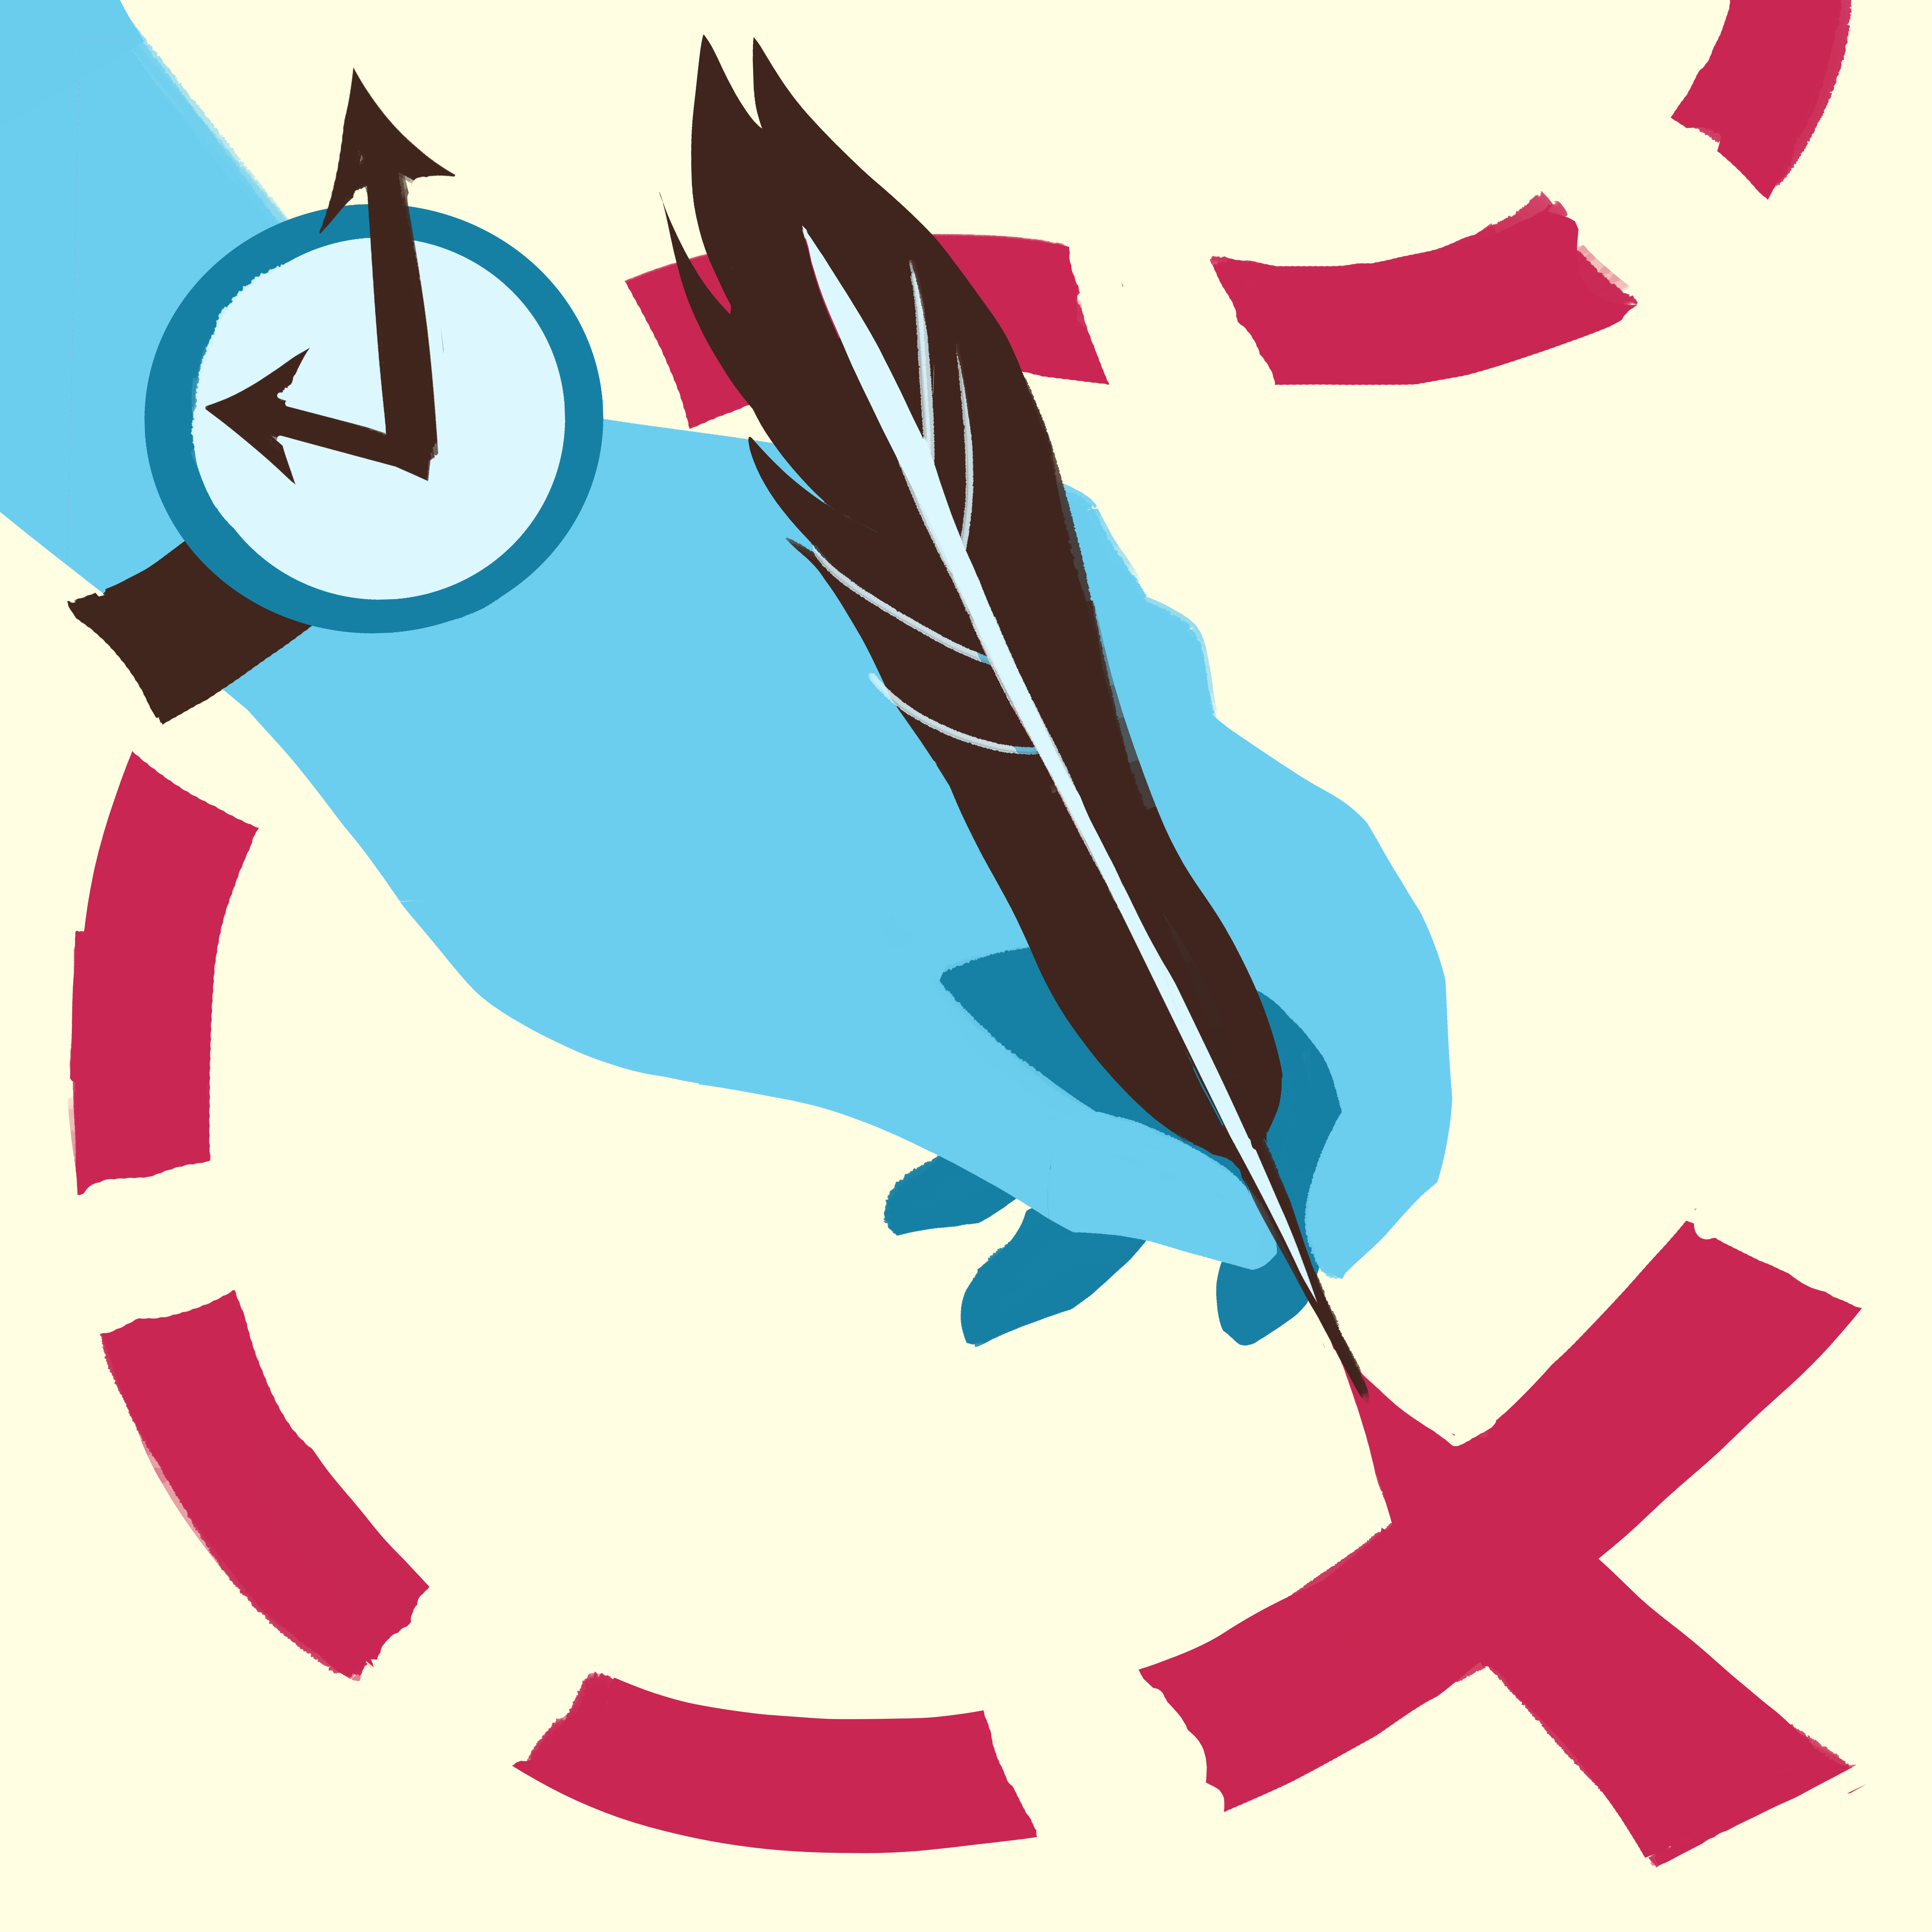 AS logo of a blue hand holding a feather quill, drawing a large red X. A broken up line lead to the X, like a treasure map. The hand is also wearing a wacky watch.